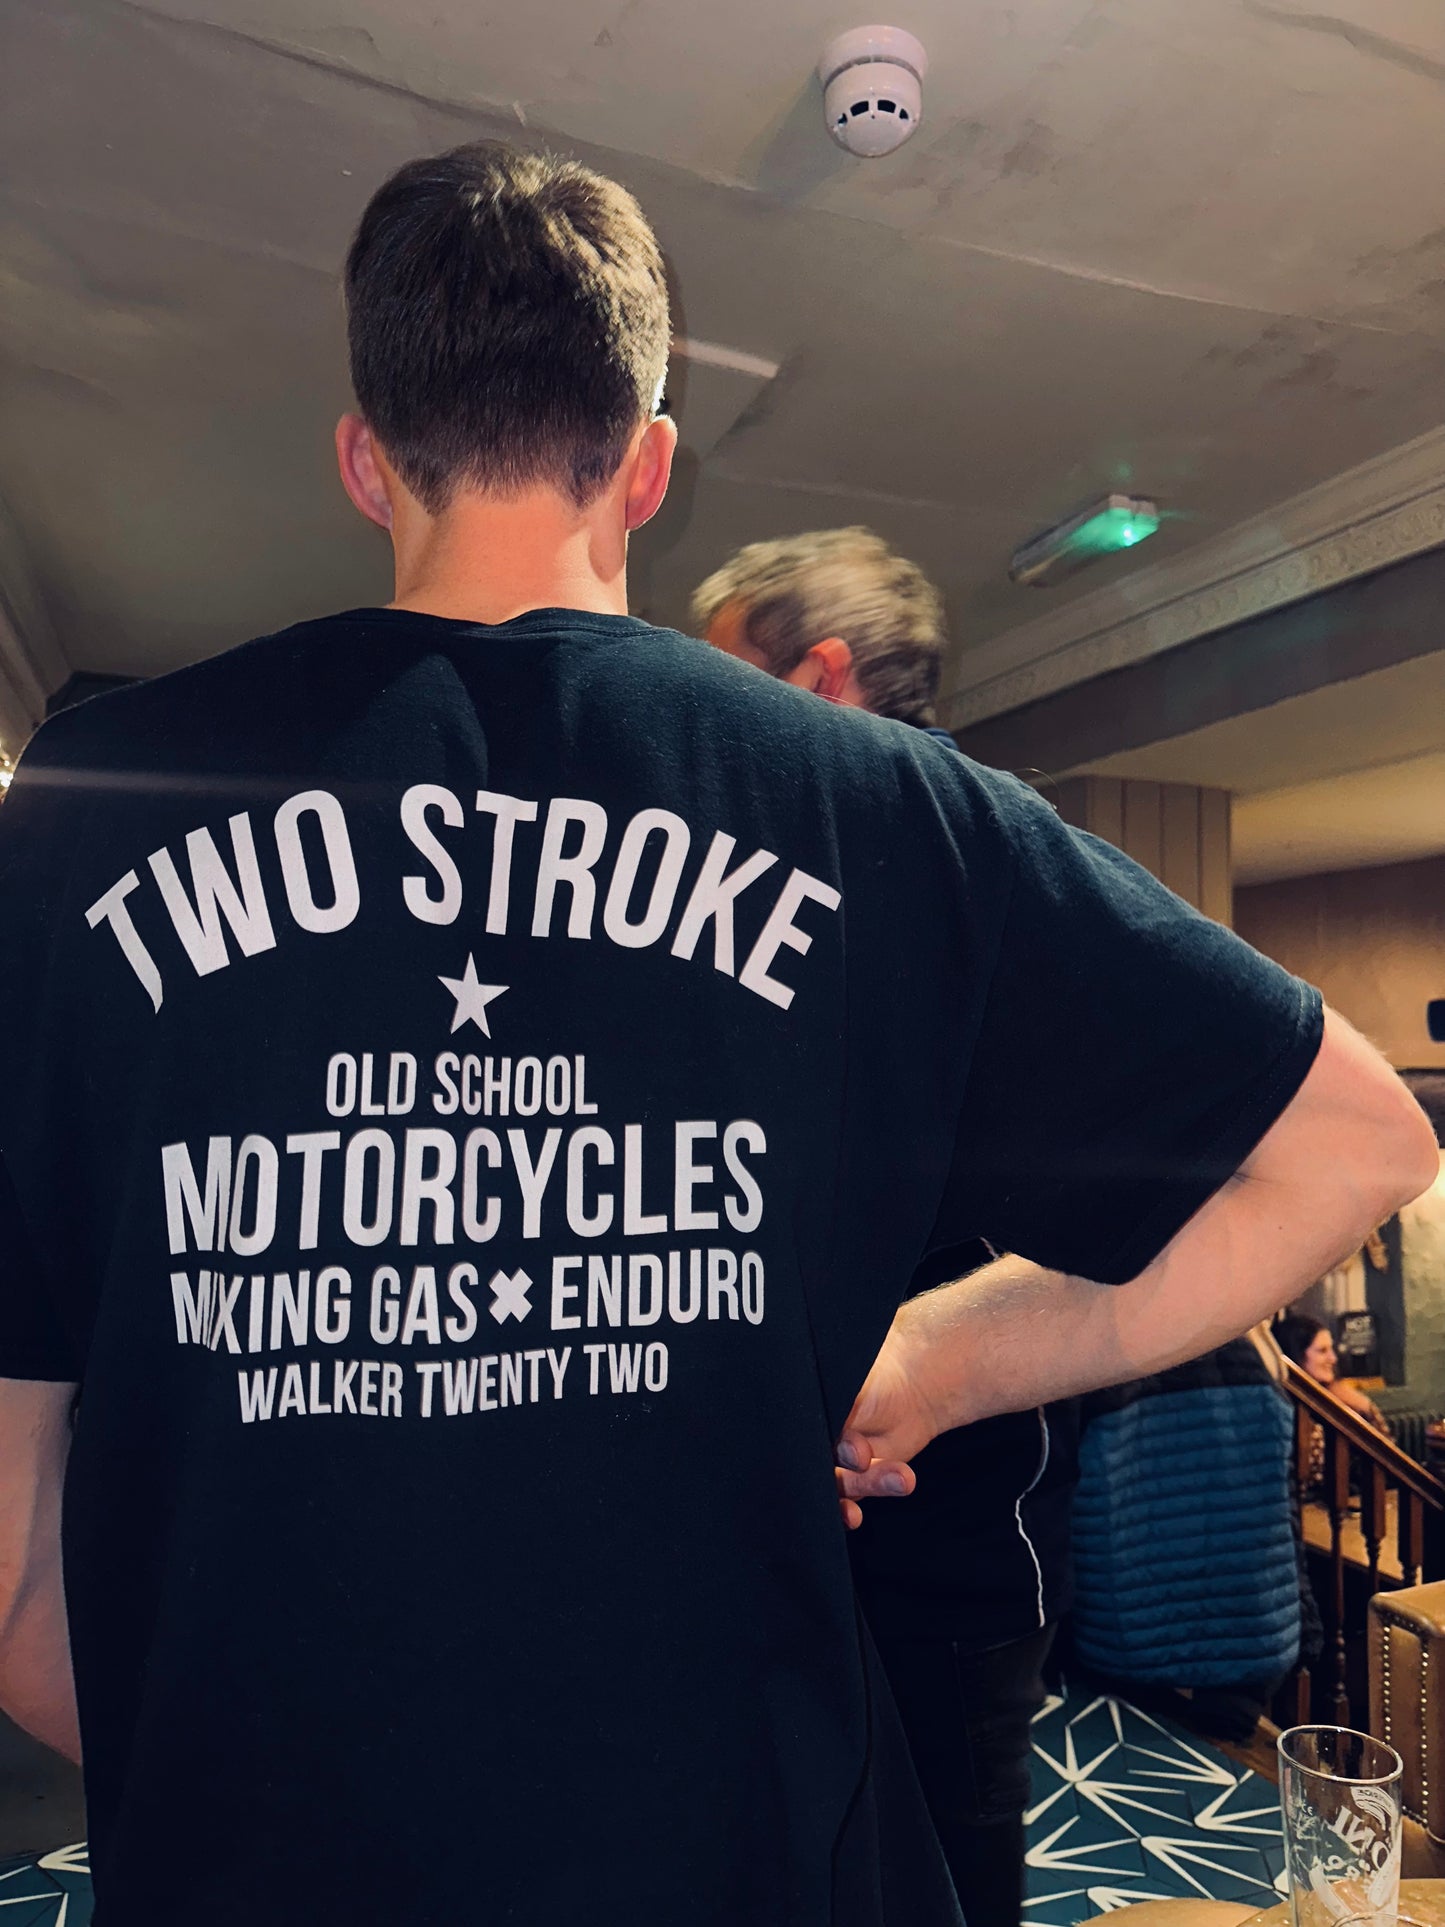 Two Stroke Motorcycles Tee